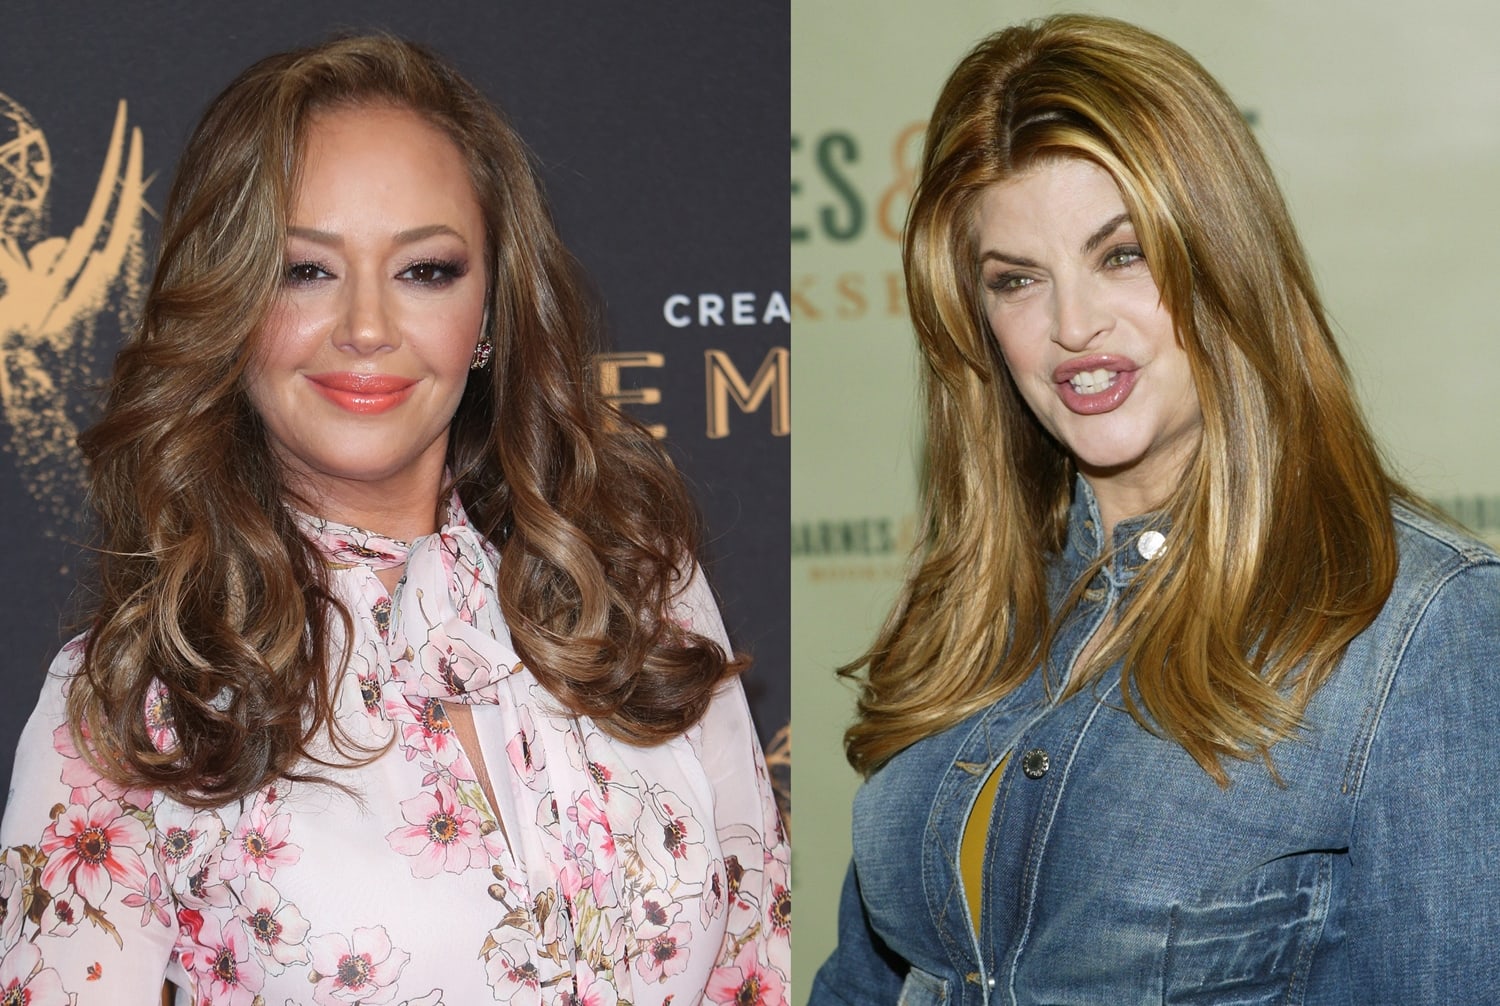 Leah Remini left the Church of Scientology and has had a tumultuous relationship with Kirstie Alley ever since